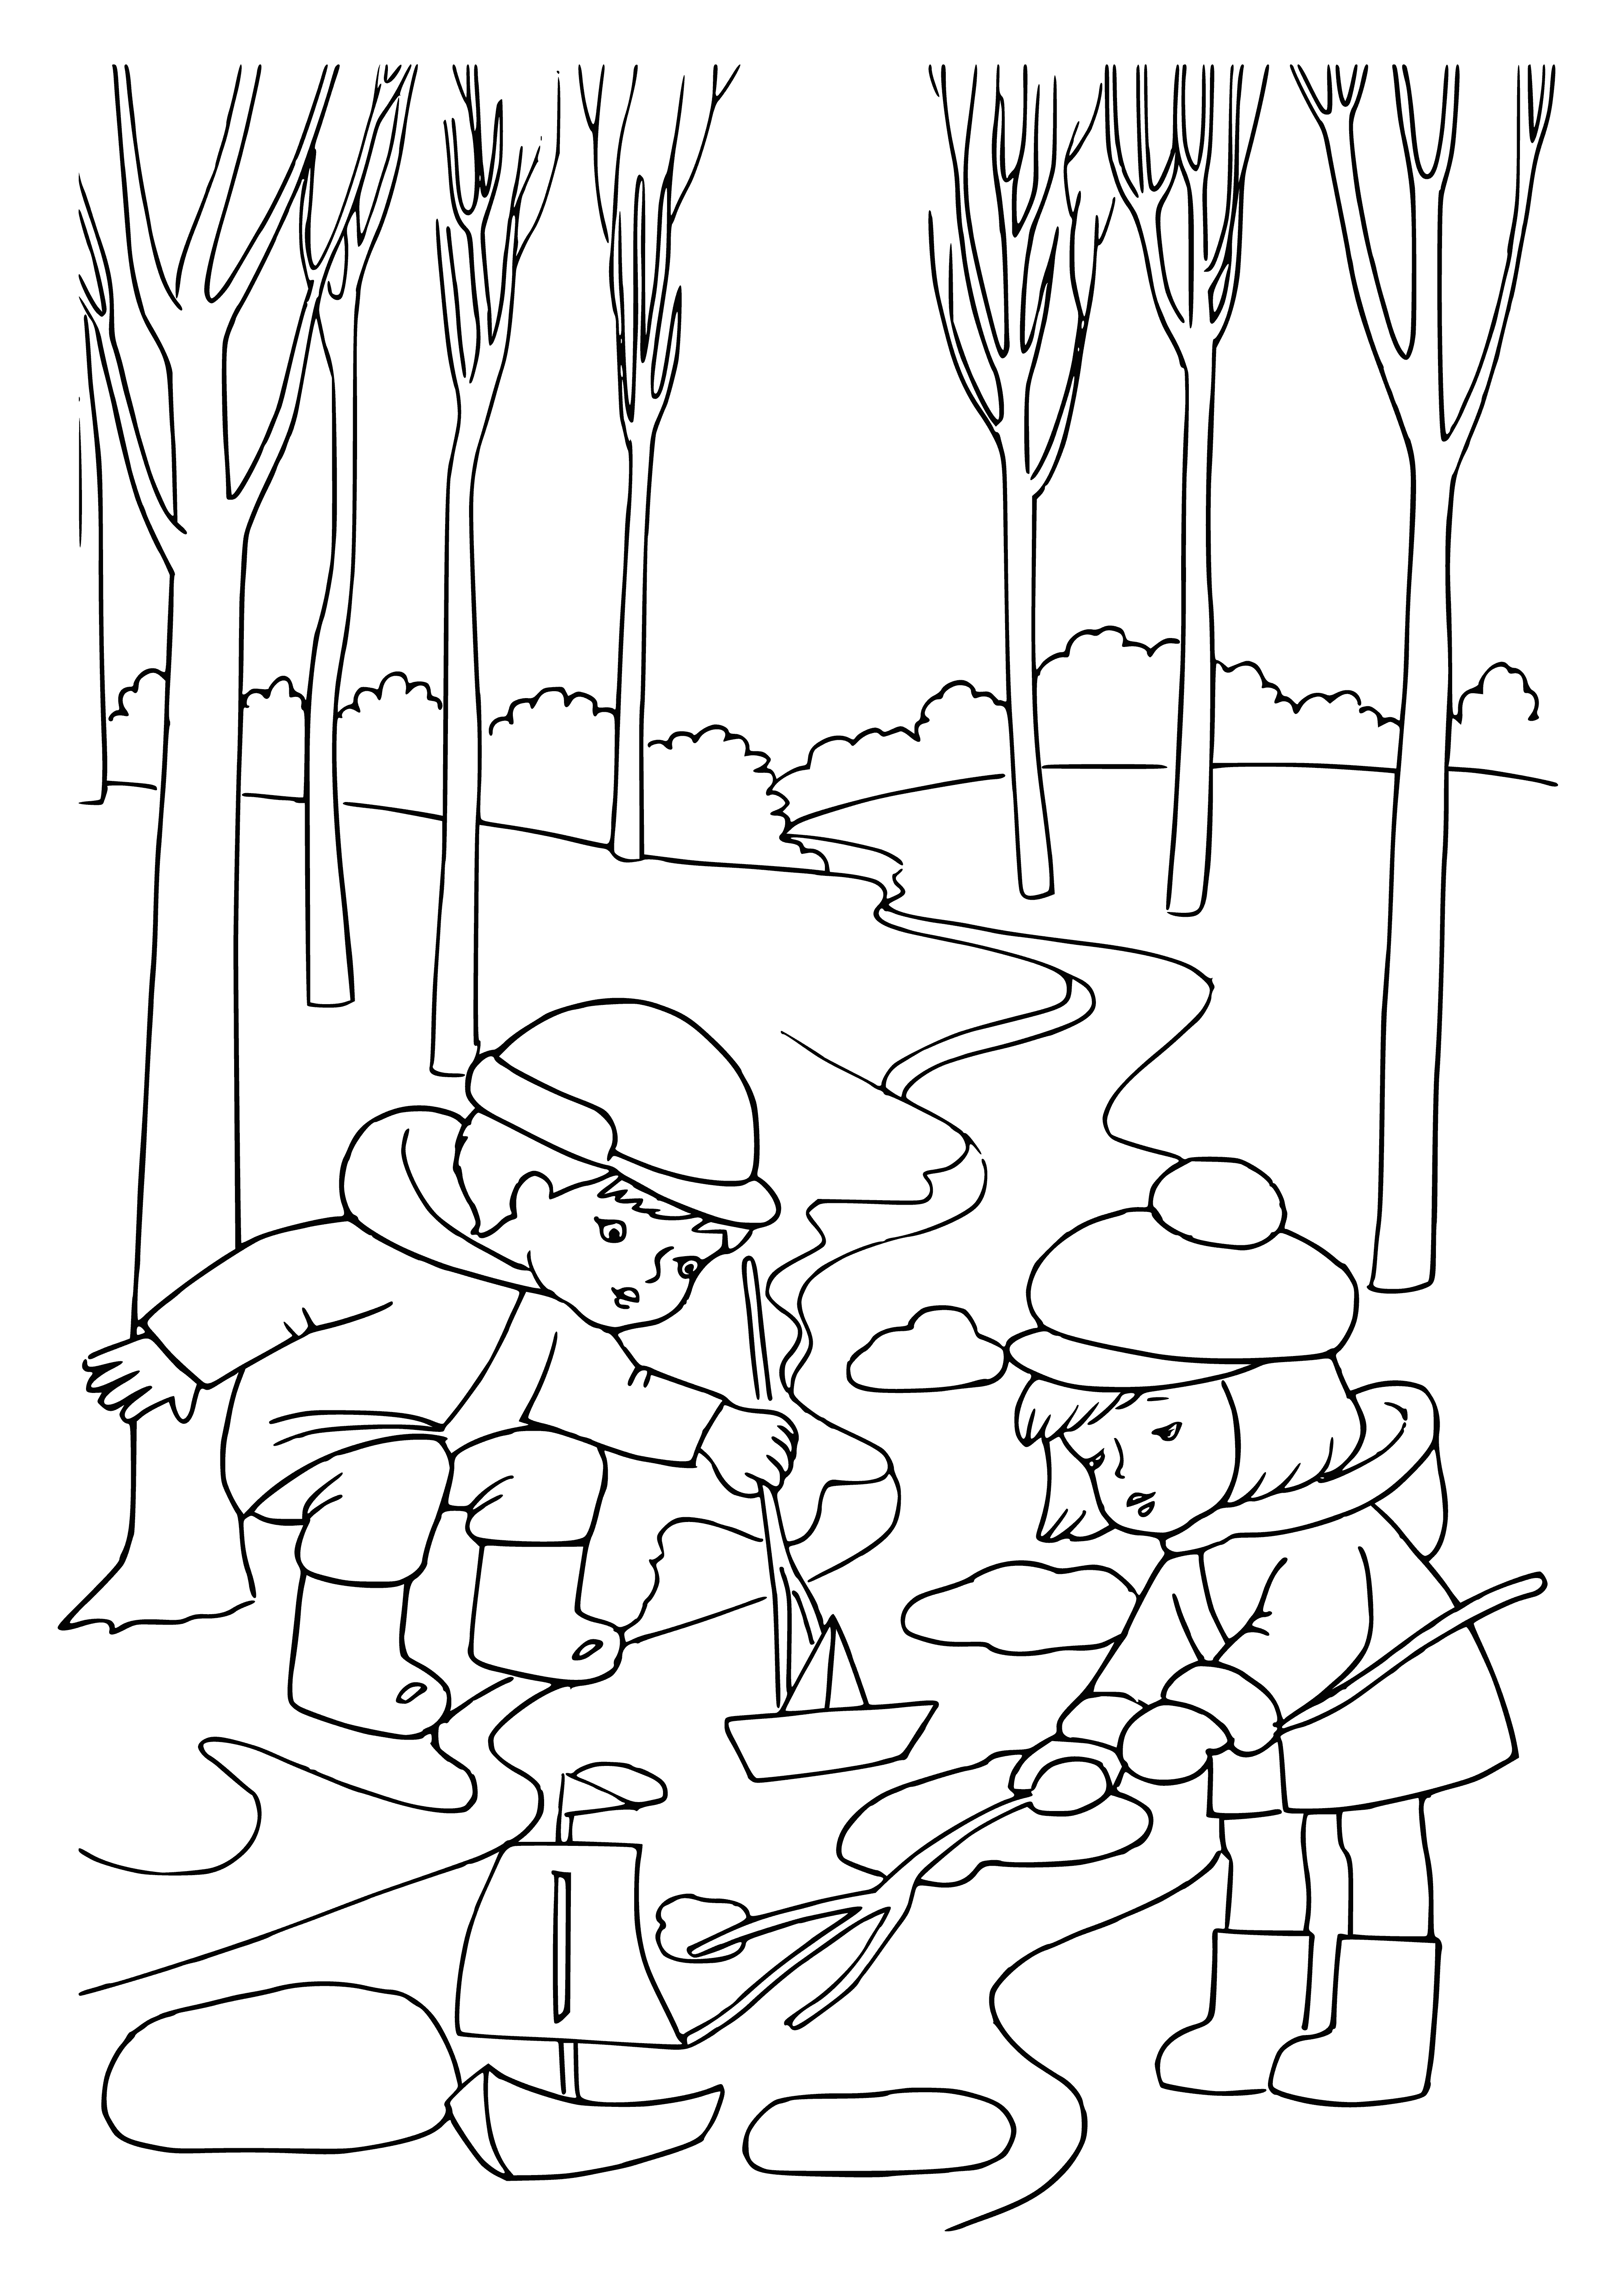 coloring page: Brooks' coloring page features a stone bridge crossing a river with trees, flowers, & a path into the distance.